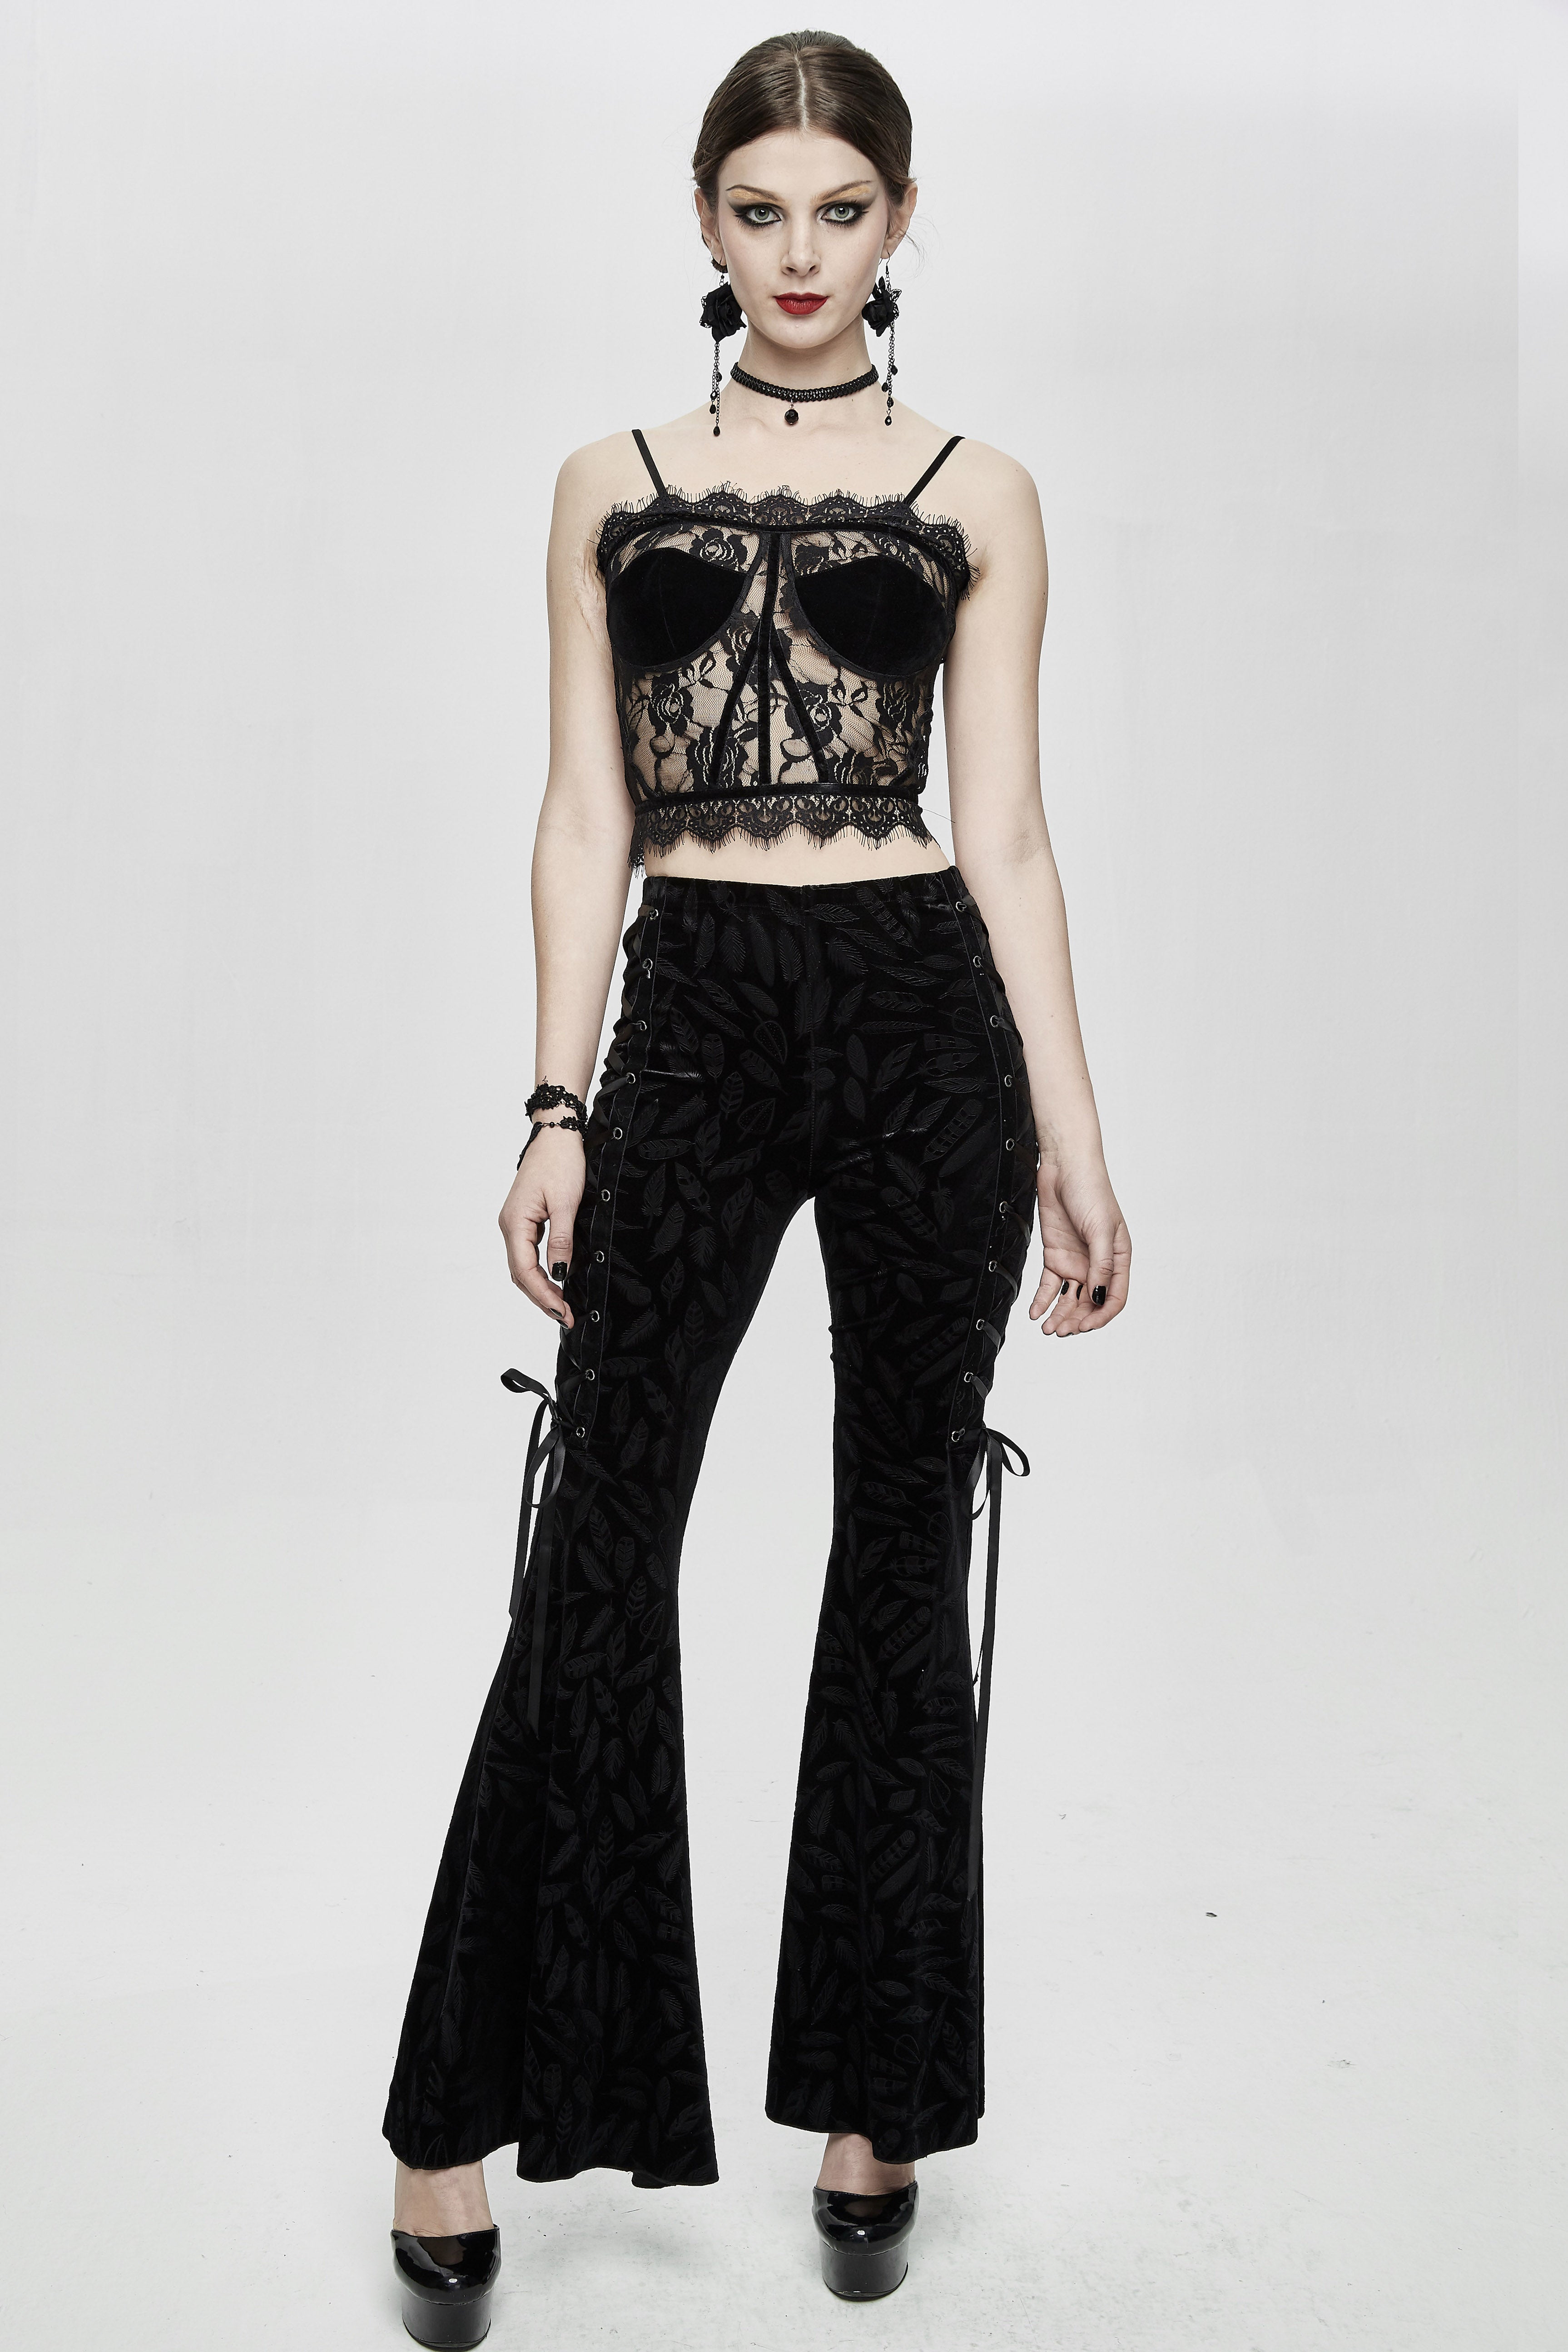 Delicate Silence Lace Top - Goth Mall